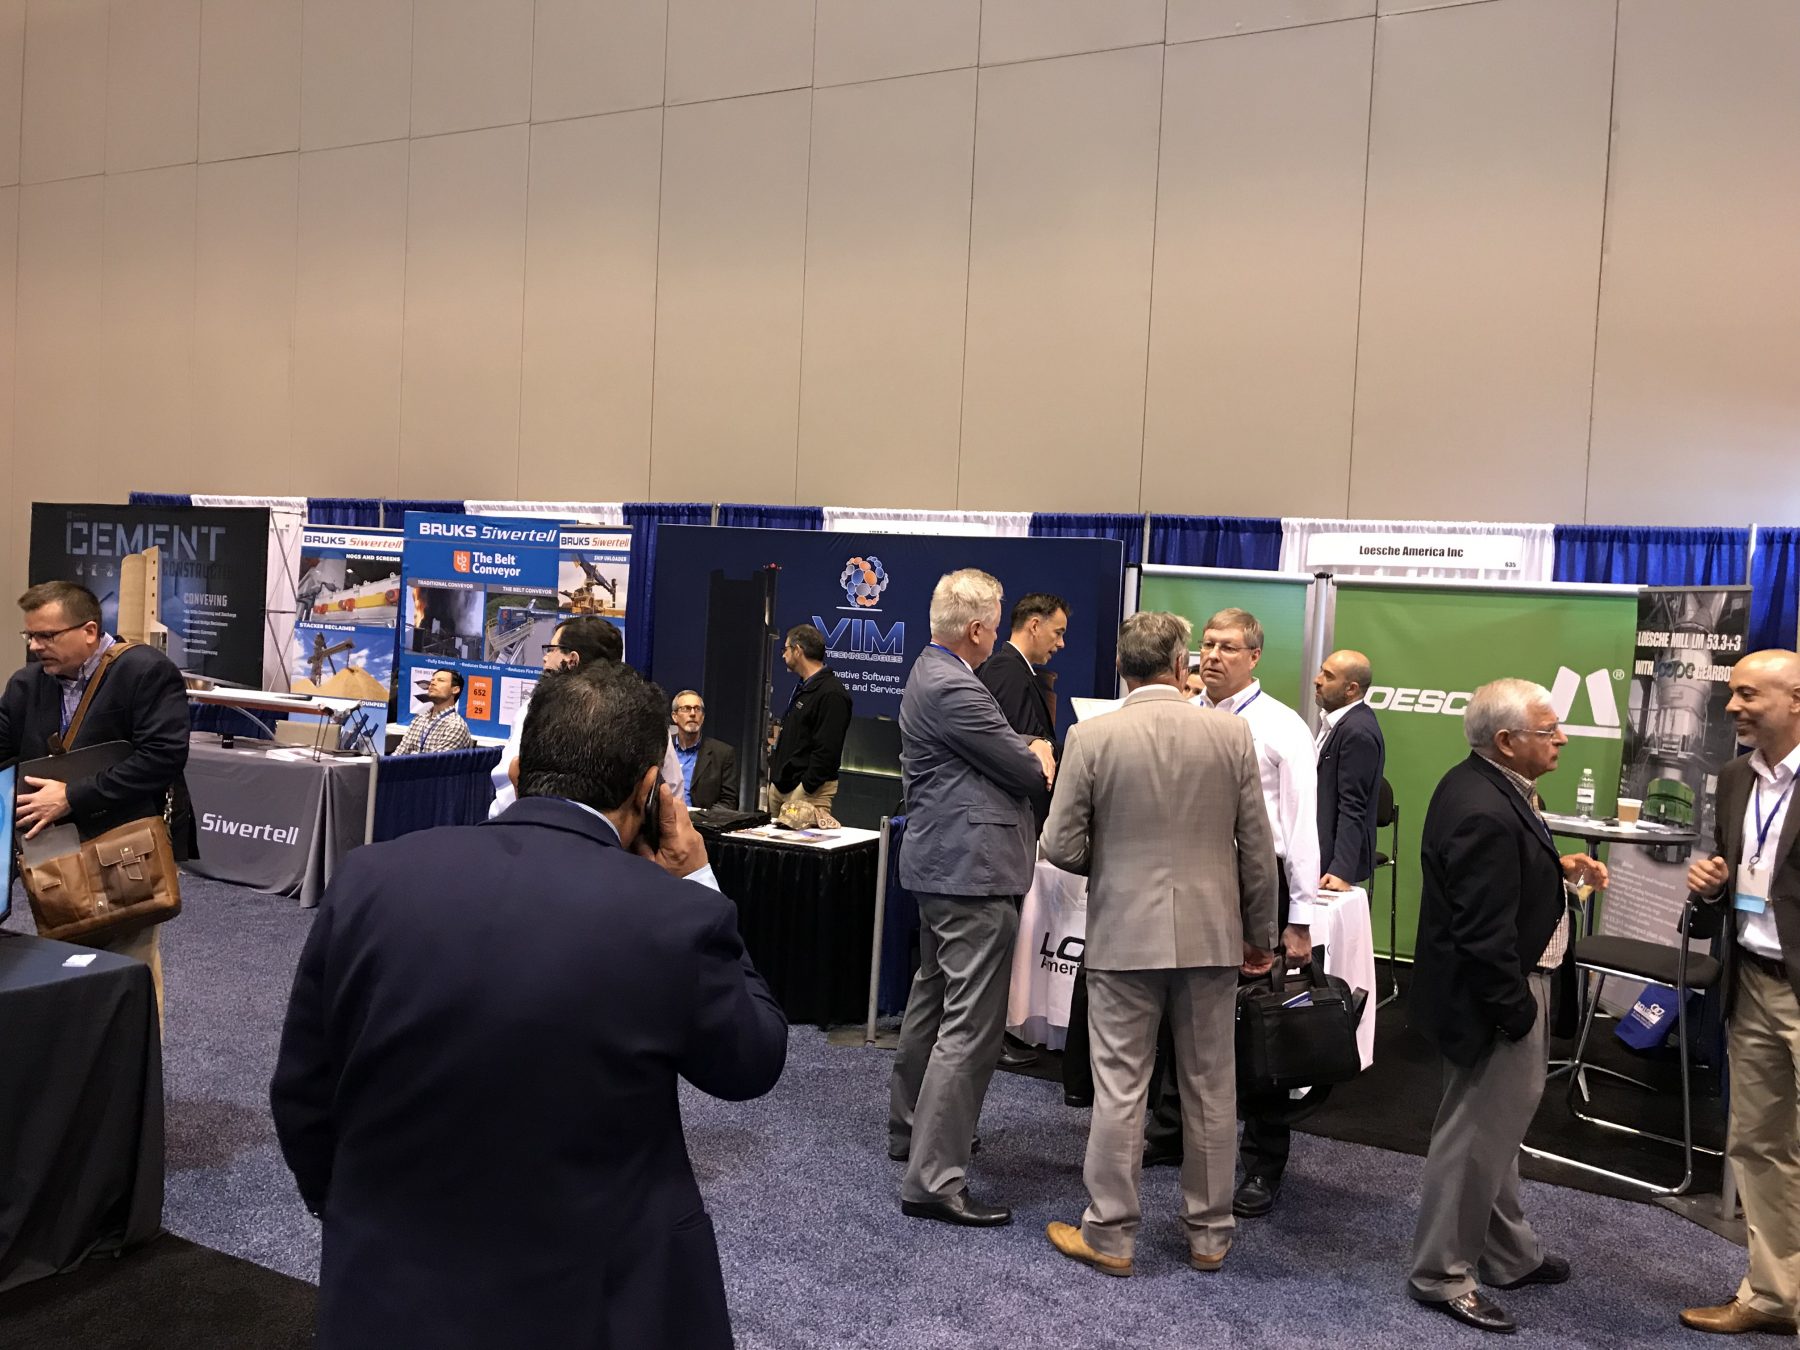 VIM Technologies Attends the 2019 IEEEIAS/PCA Cement Conference VIM